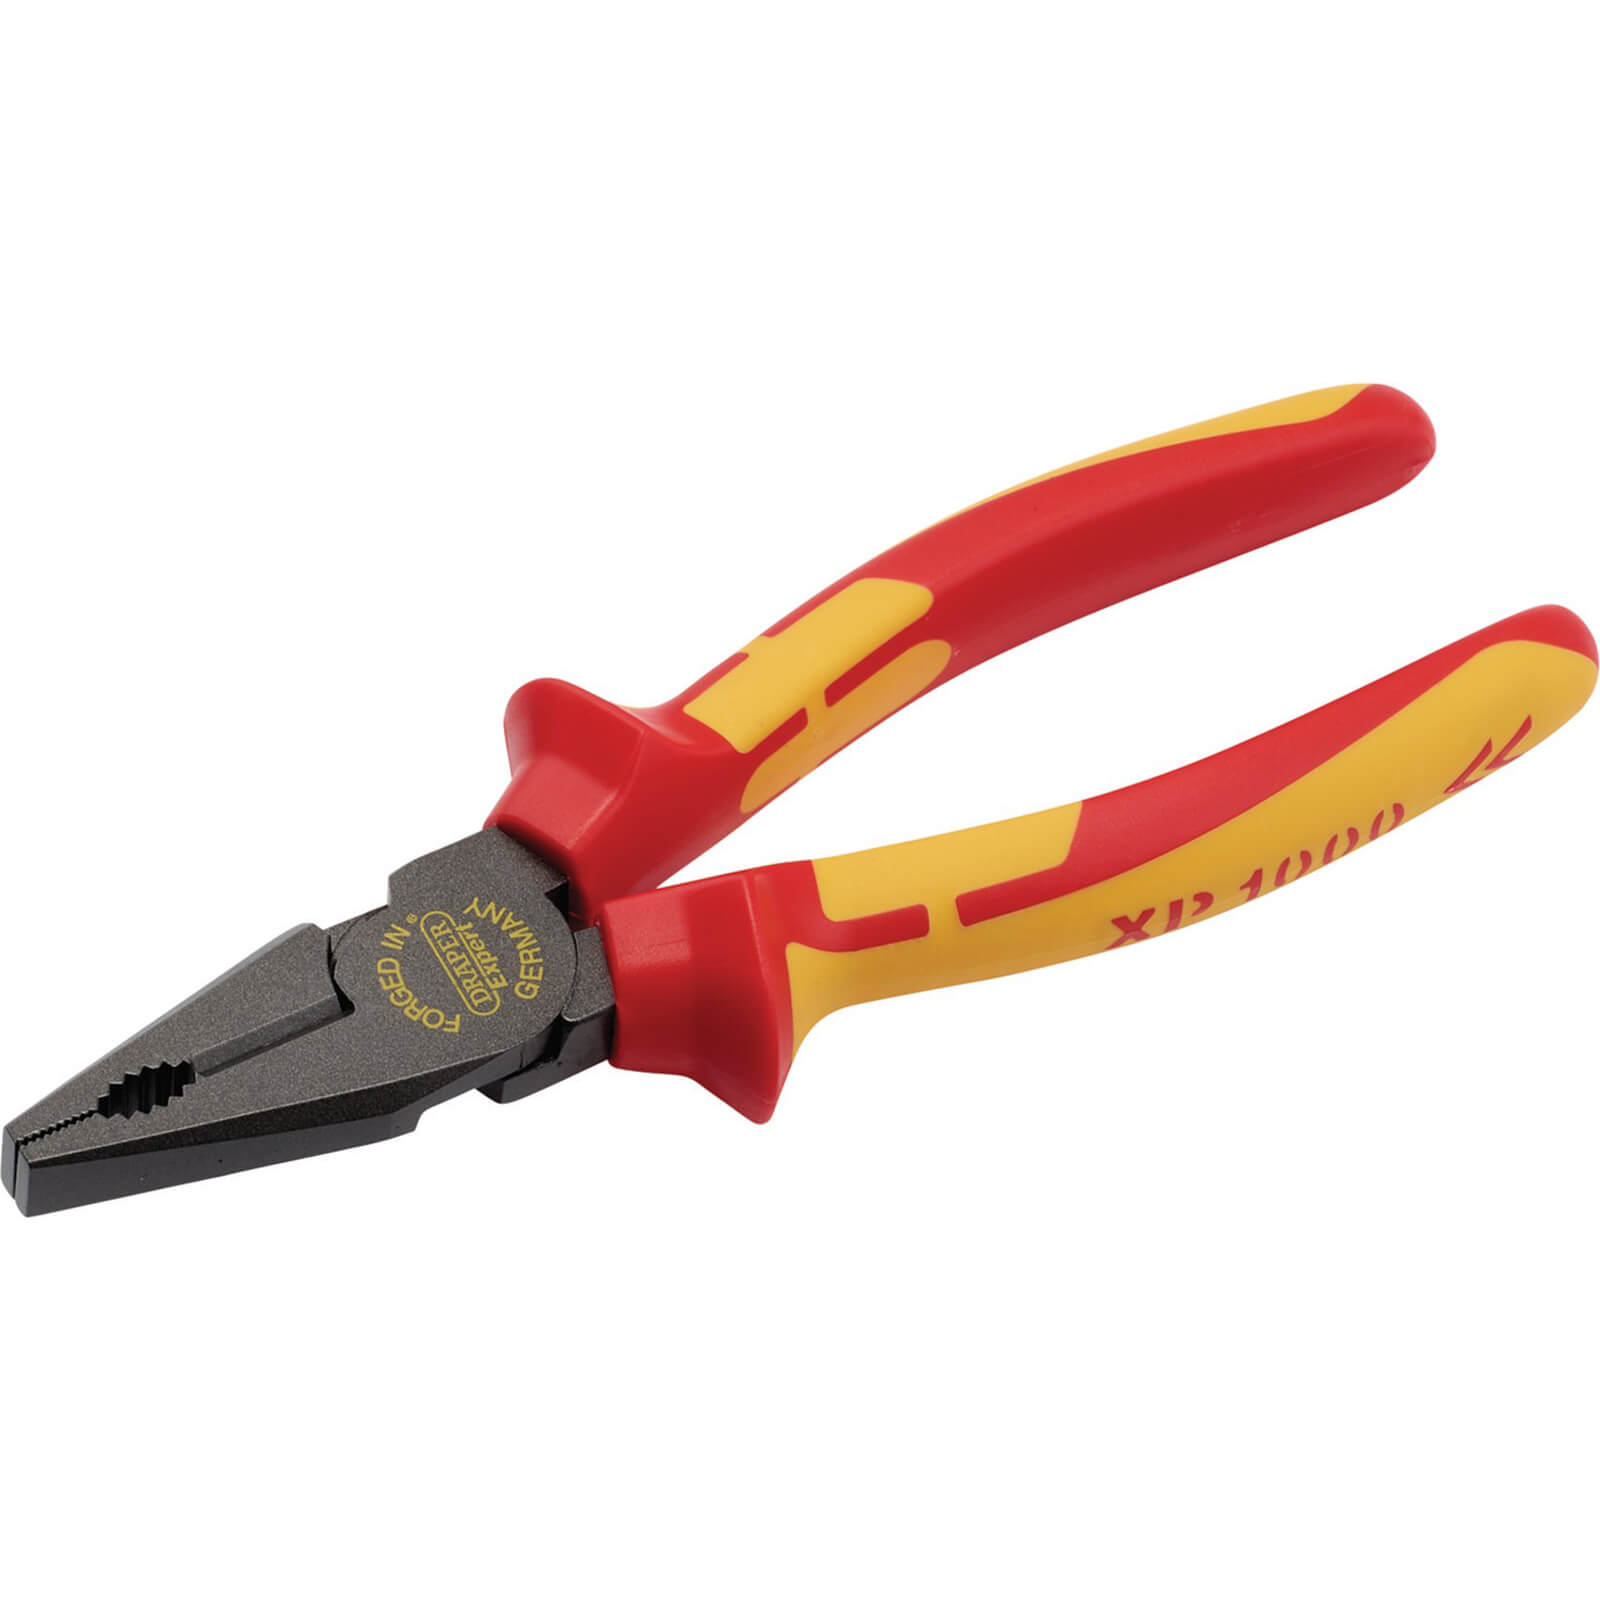 Photo of Draper Xp1000 Vde Insulated High Leverage Combination Pliers 180mm